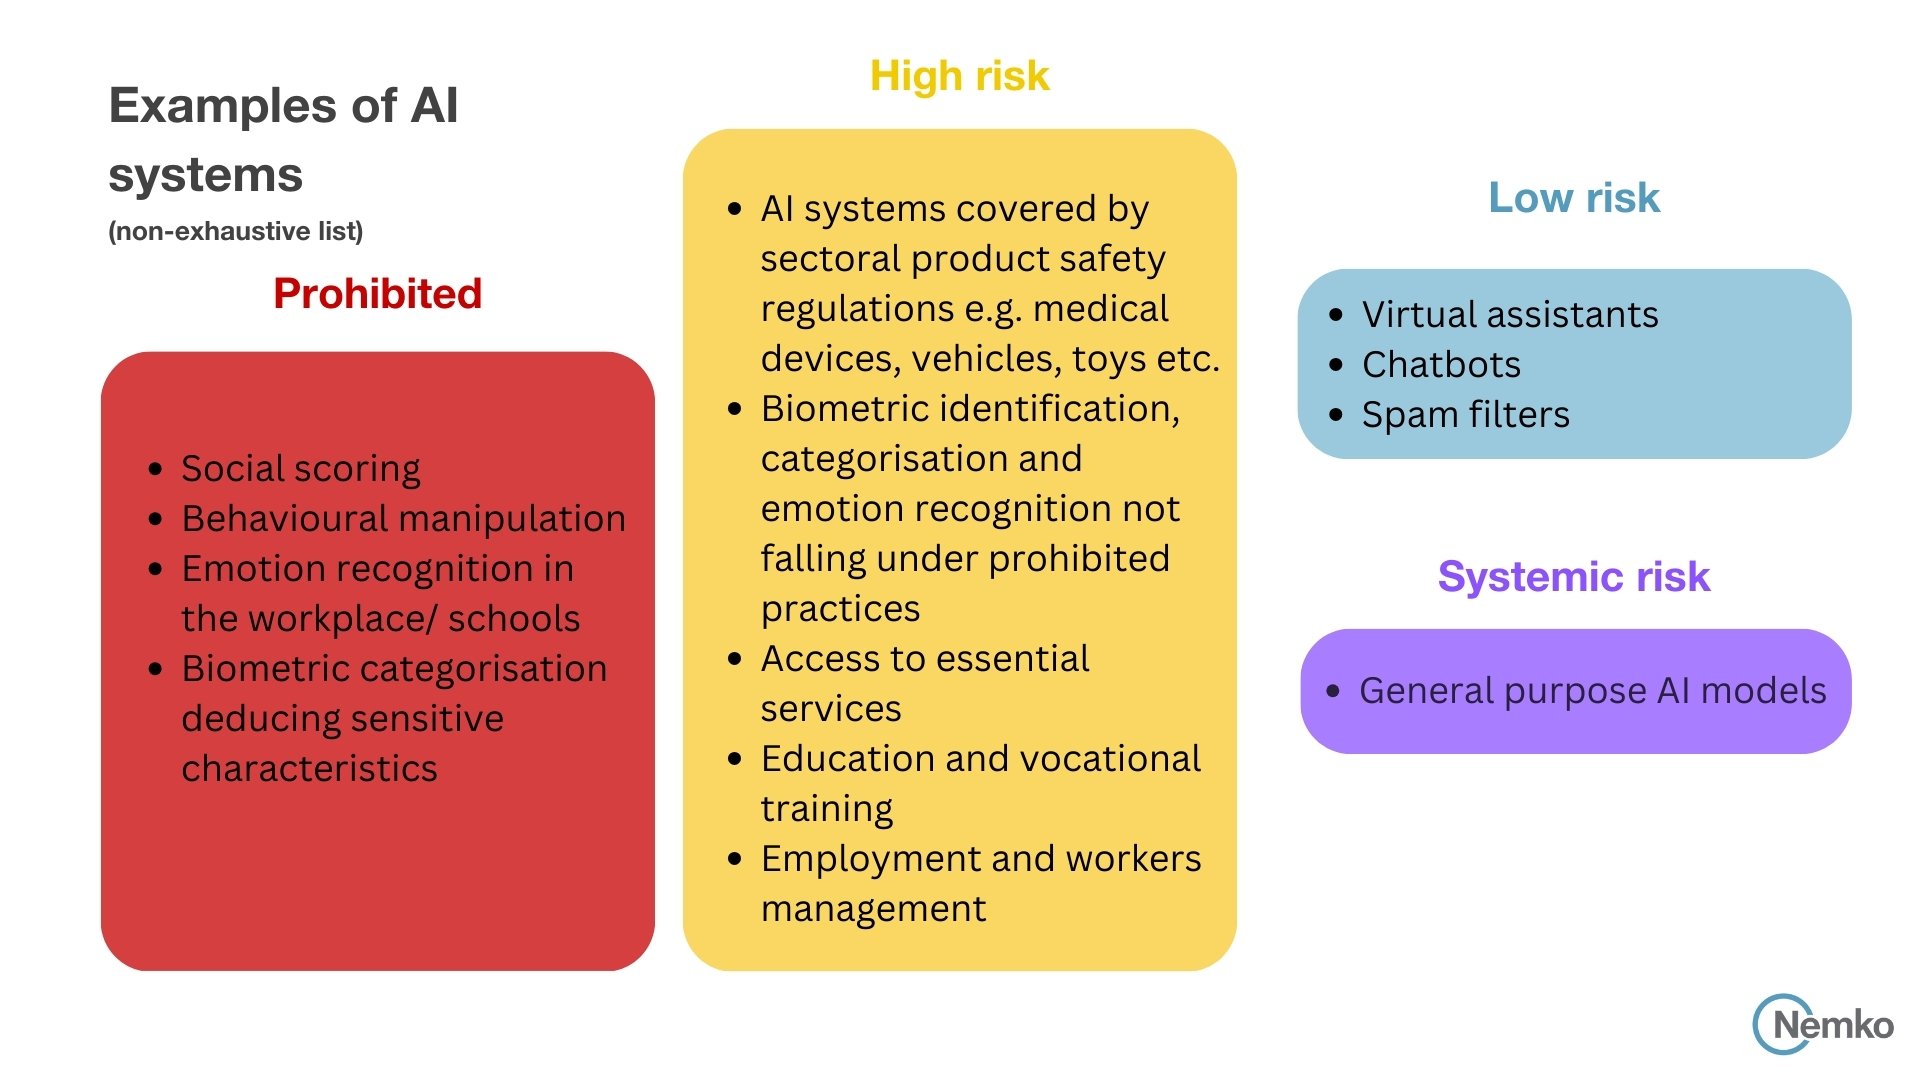 on-exhaustive list of examples of AI systems categorized by level and type of risk in the EU AI Act.